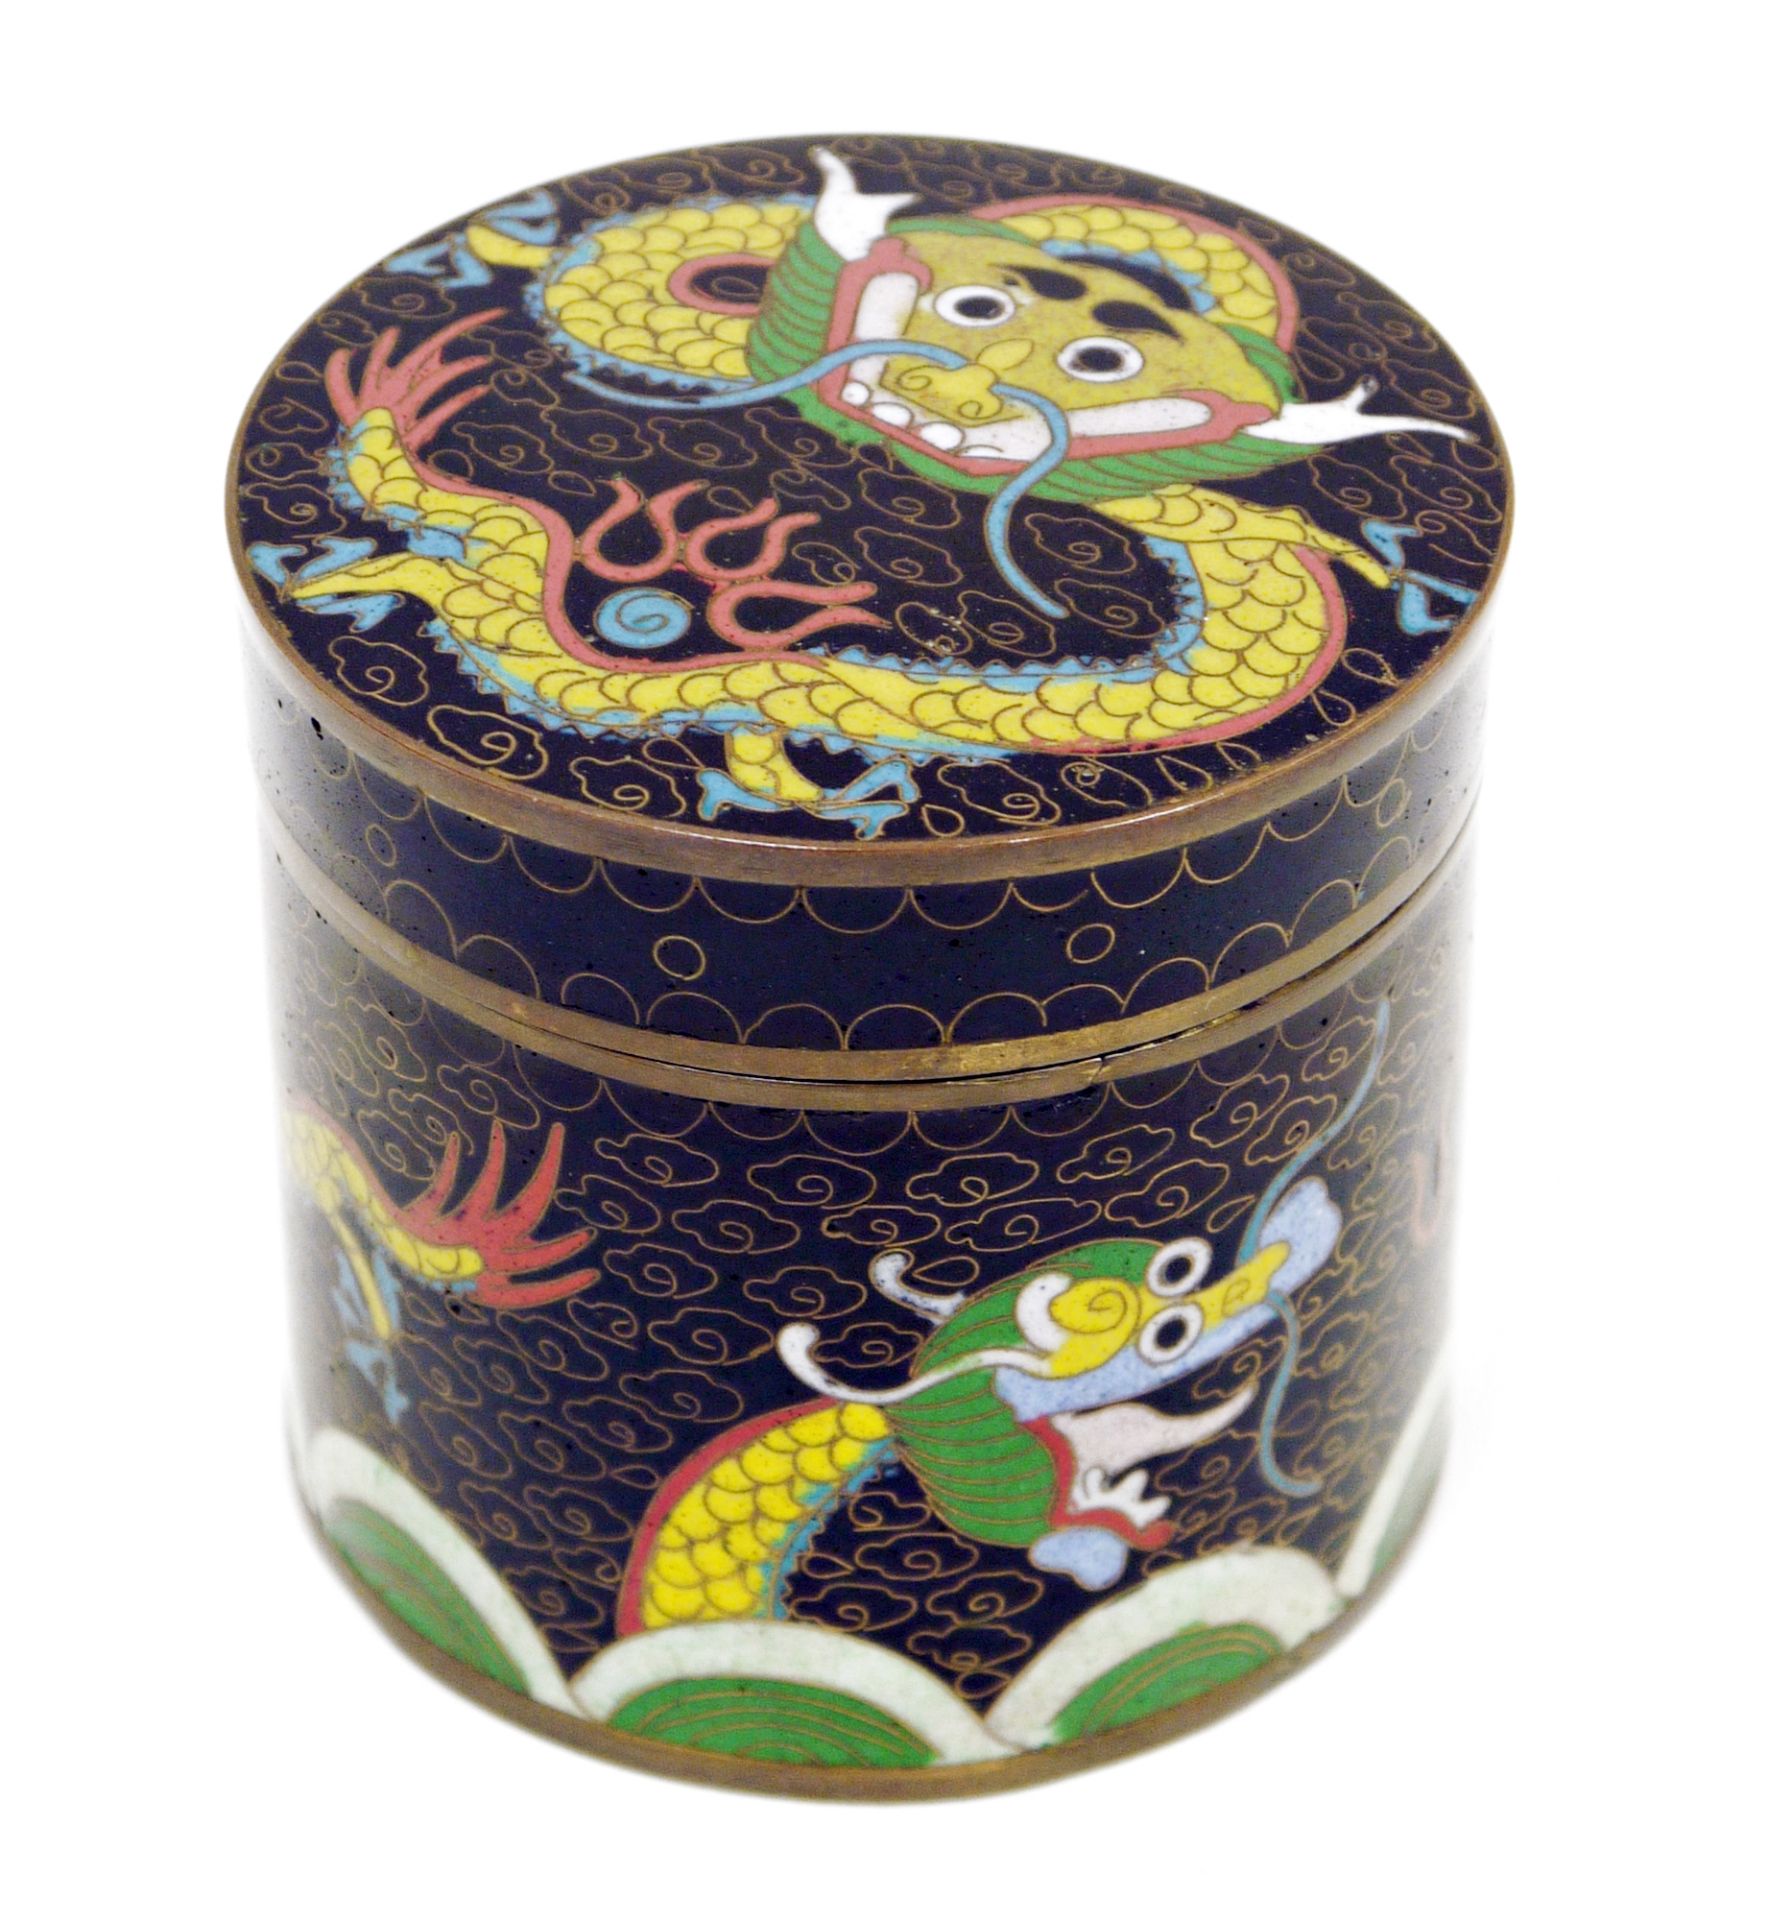 Chinese cloisonne enamel cylindrical jar and cover, late 19th/early 20th century, decorated with a